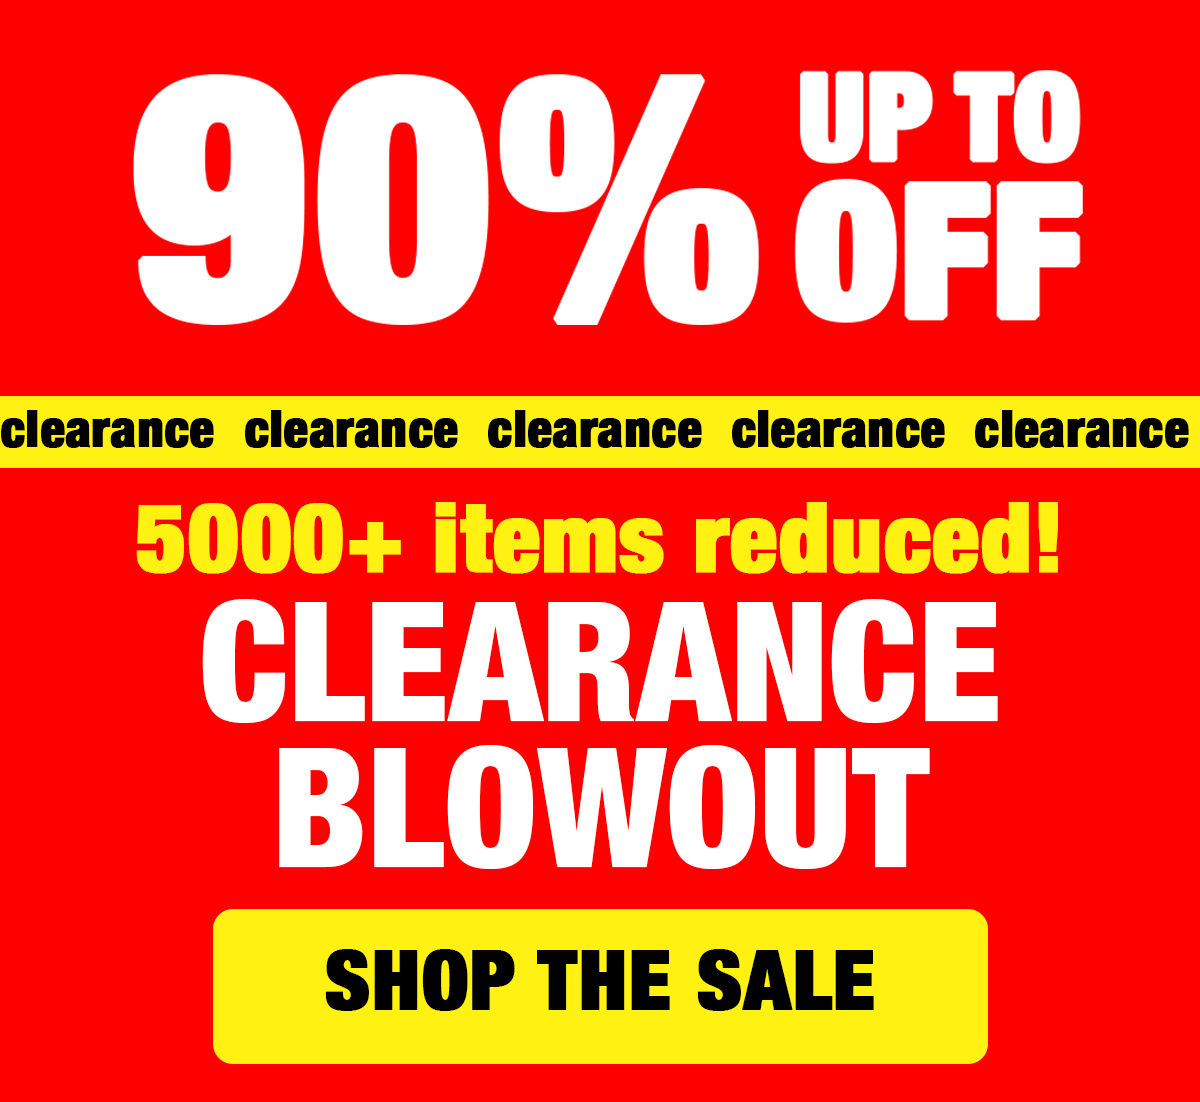 Clearance Blowout Preview - Up to 90% Off